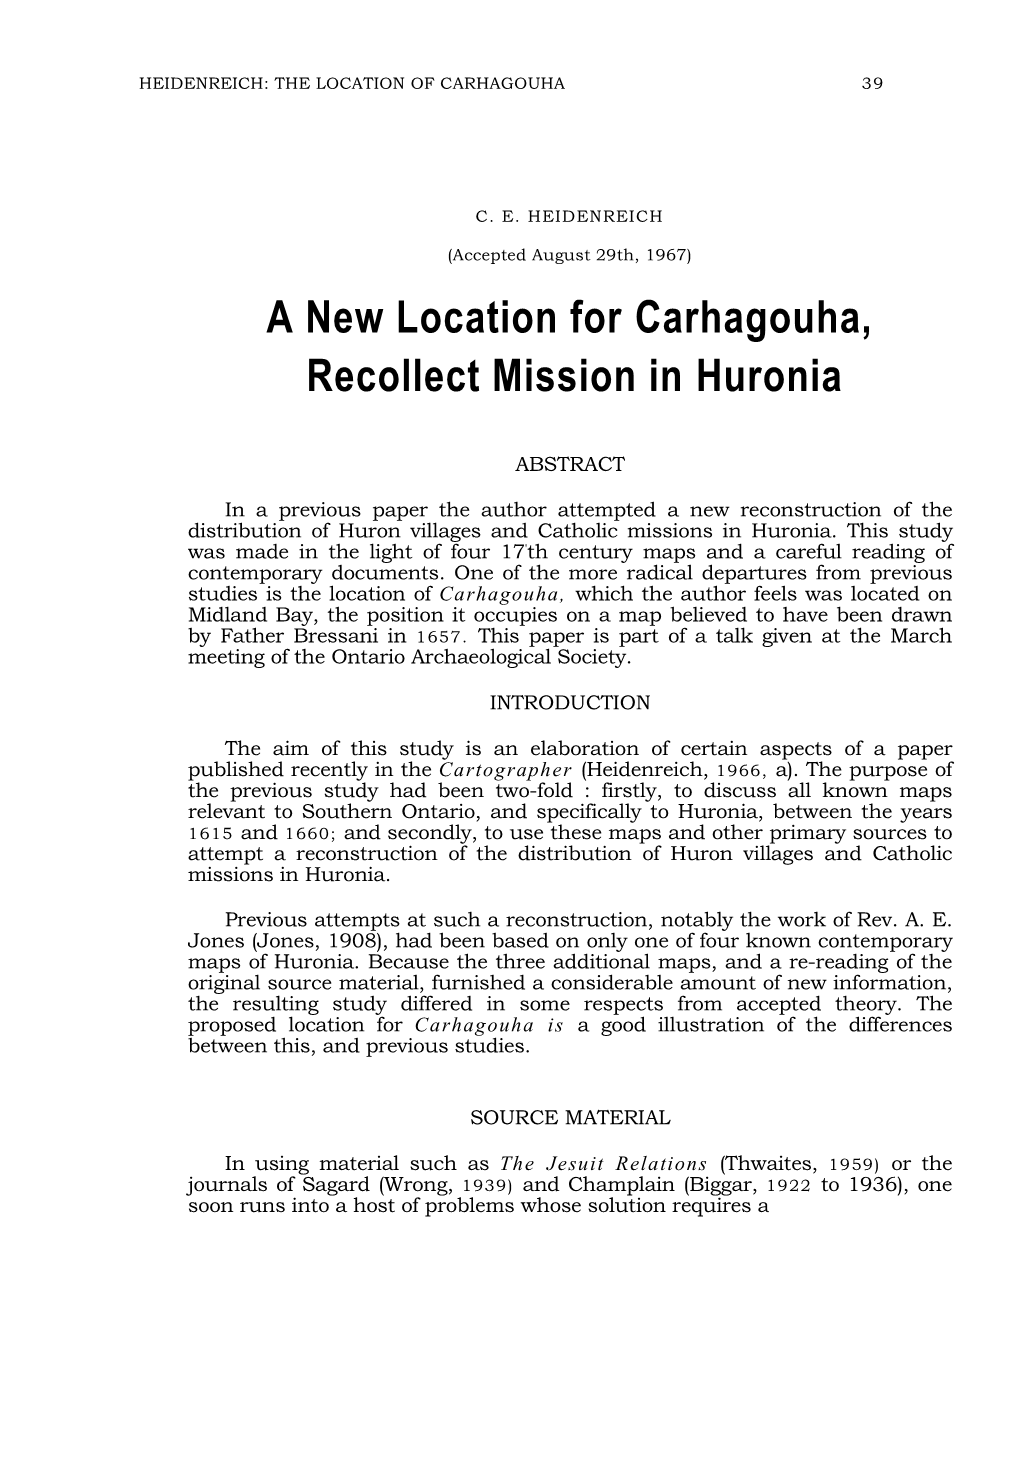 A New Location for Carhagouha, Recollect Mission in Huronia